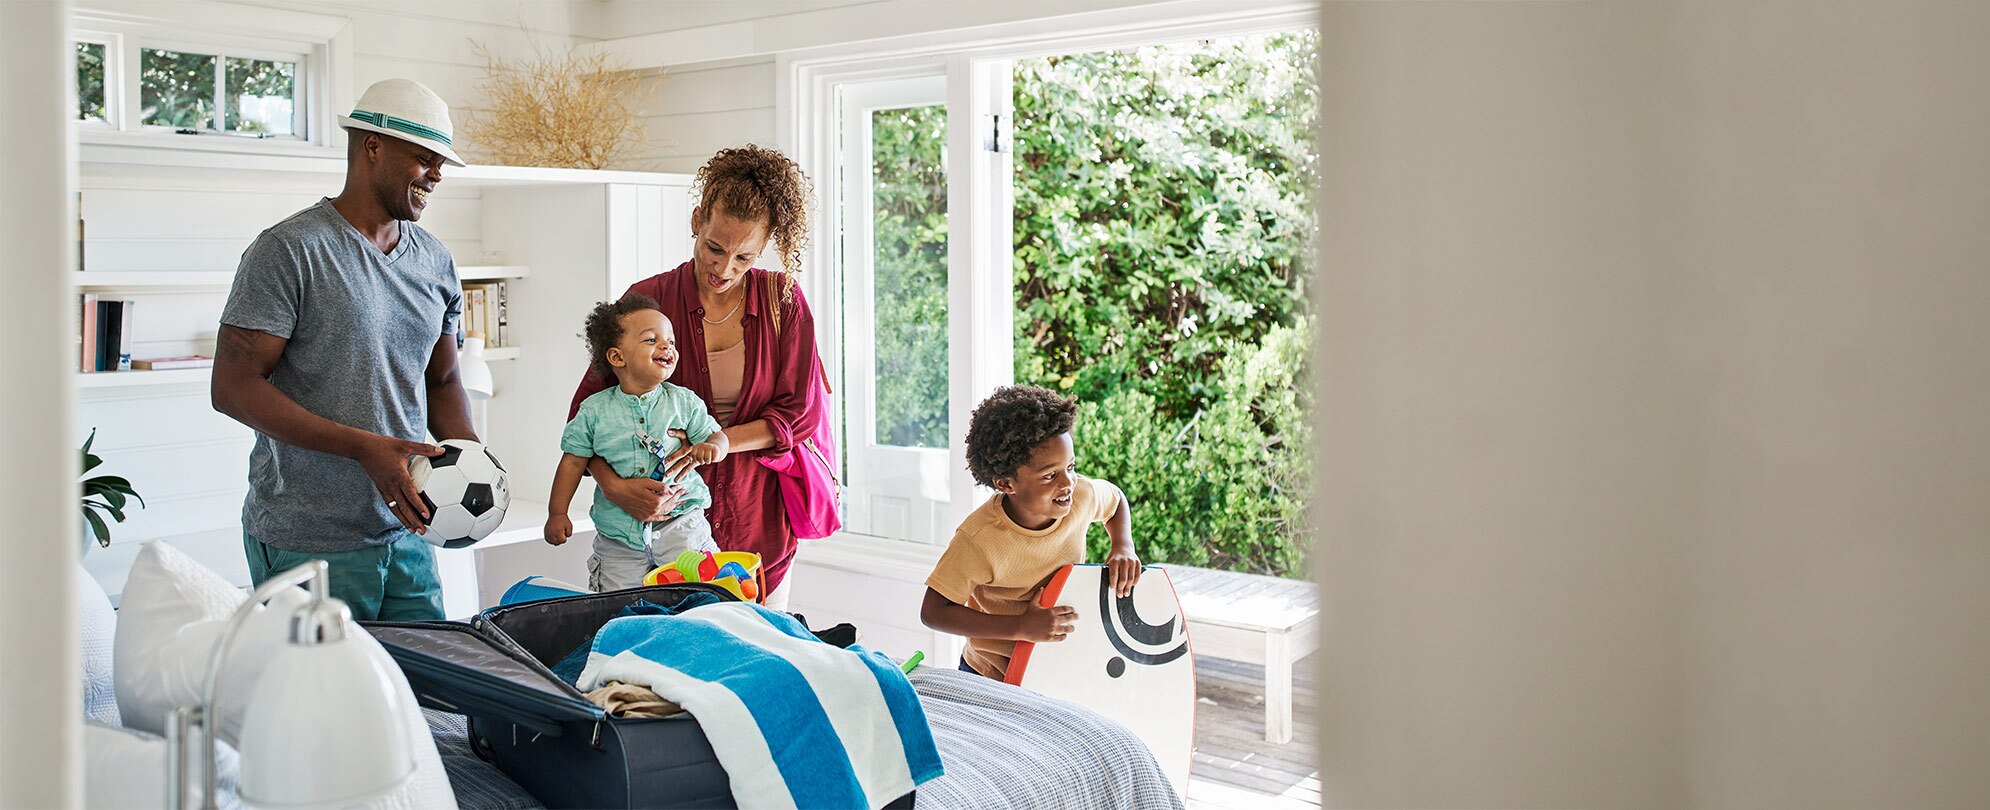 A mom, dad, and two young sons unpack their suitcase in a WorldMark resort suite.